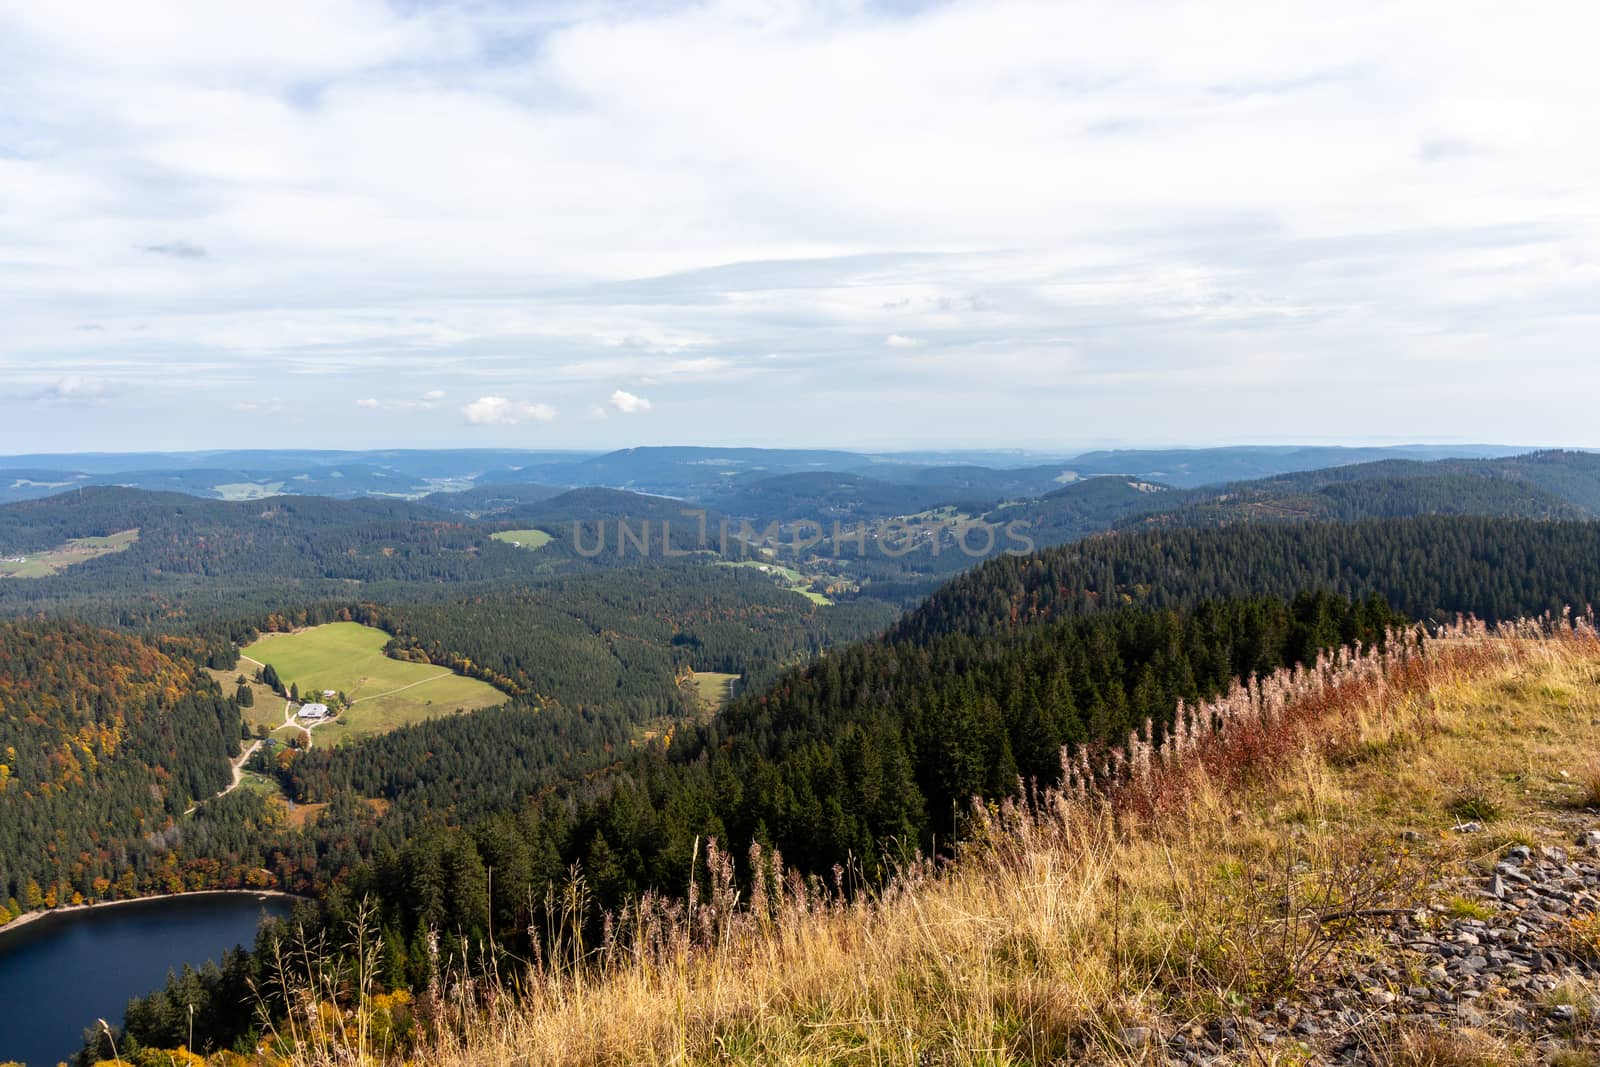 Wide angle view at landscape and lake Feldsee from mountain Feldberg, Black Forest in autumn with multi colored vegetation